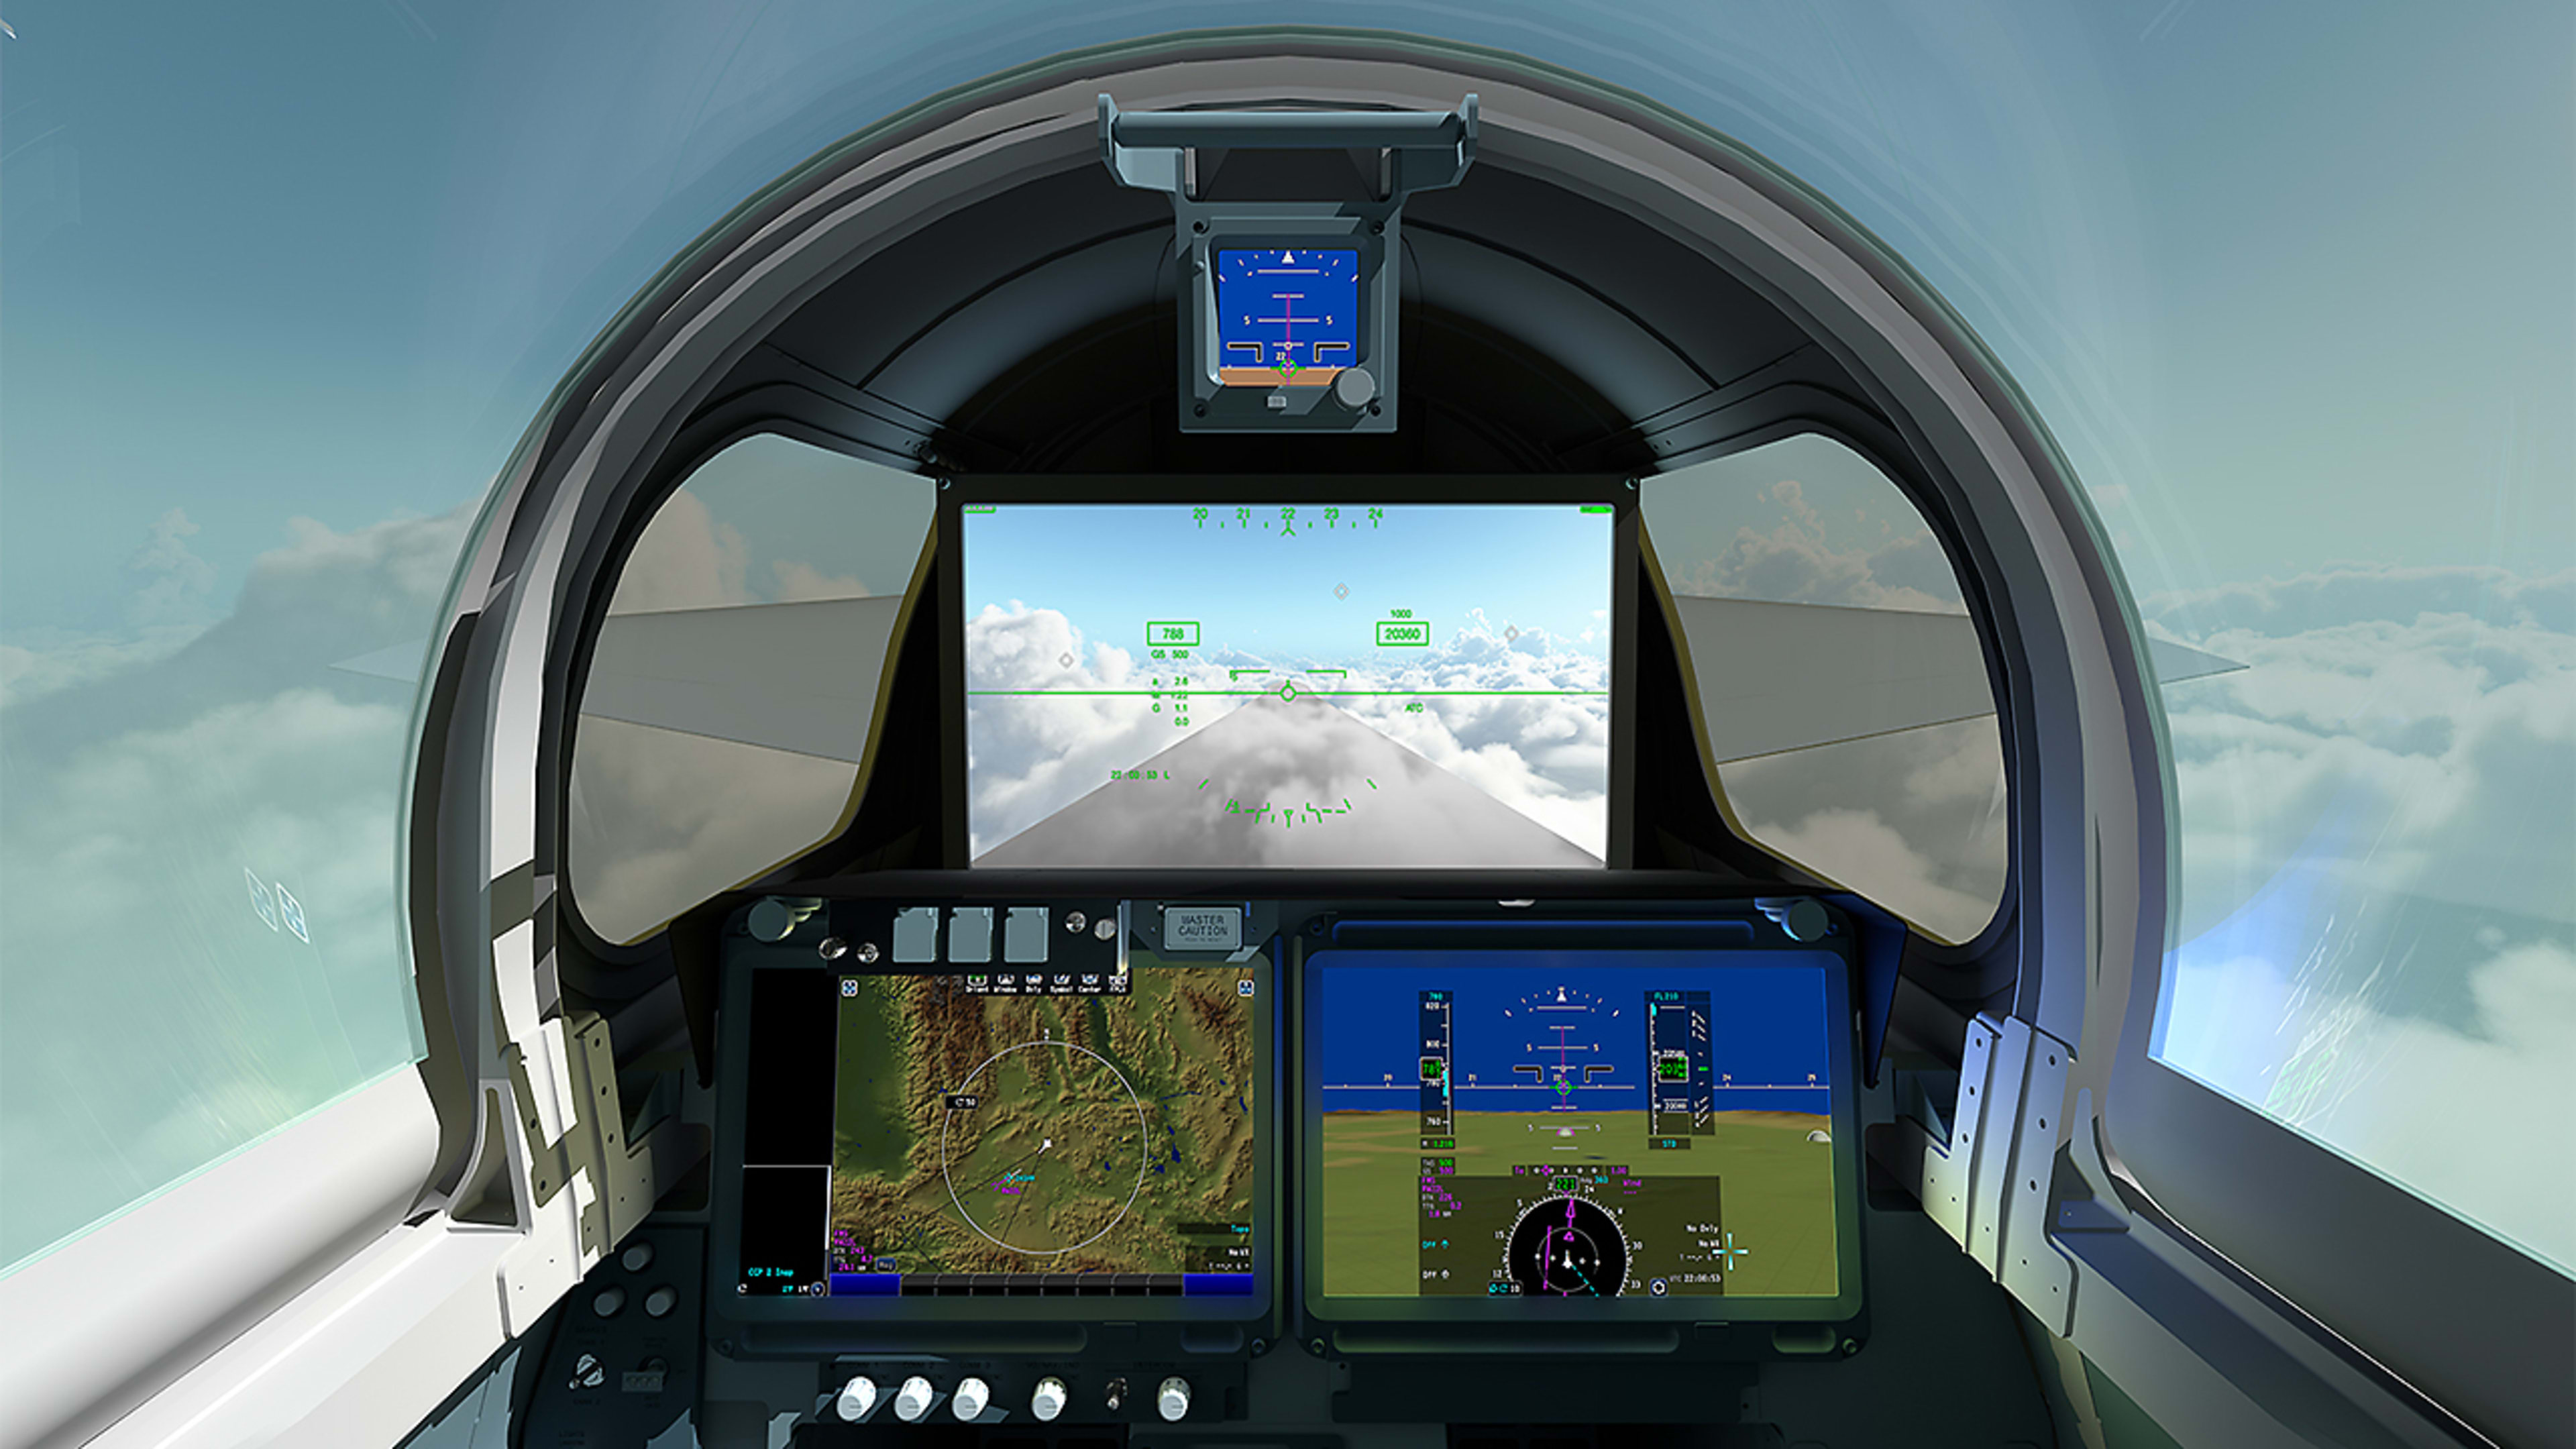 Airplanes with windowless cockpits are here. Are you ready to fly in one?